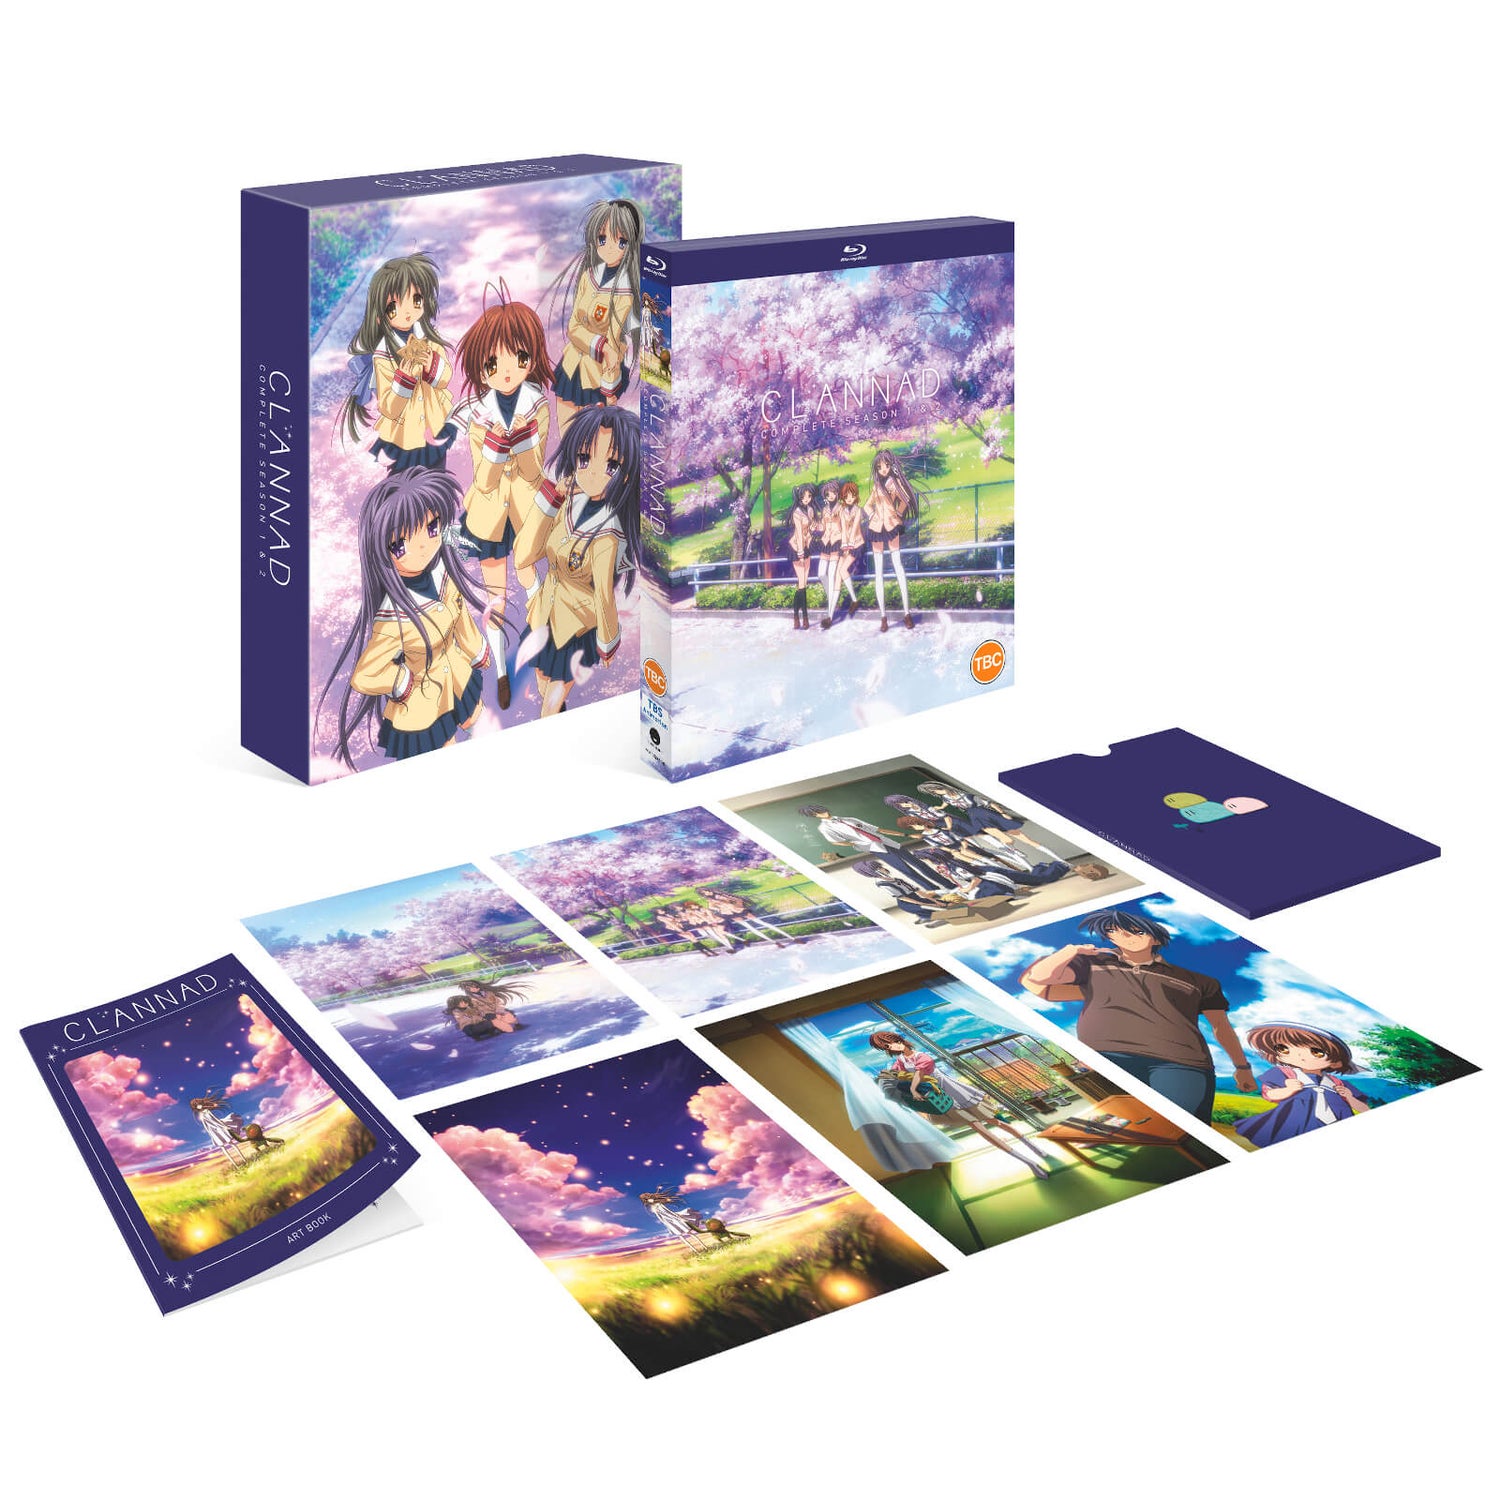 Clannad & Clannad After Story Complete Collectie - Limited Edition